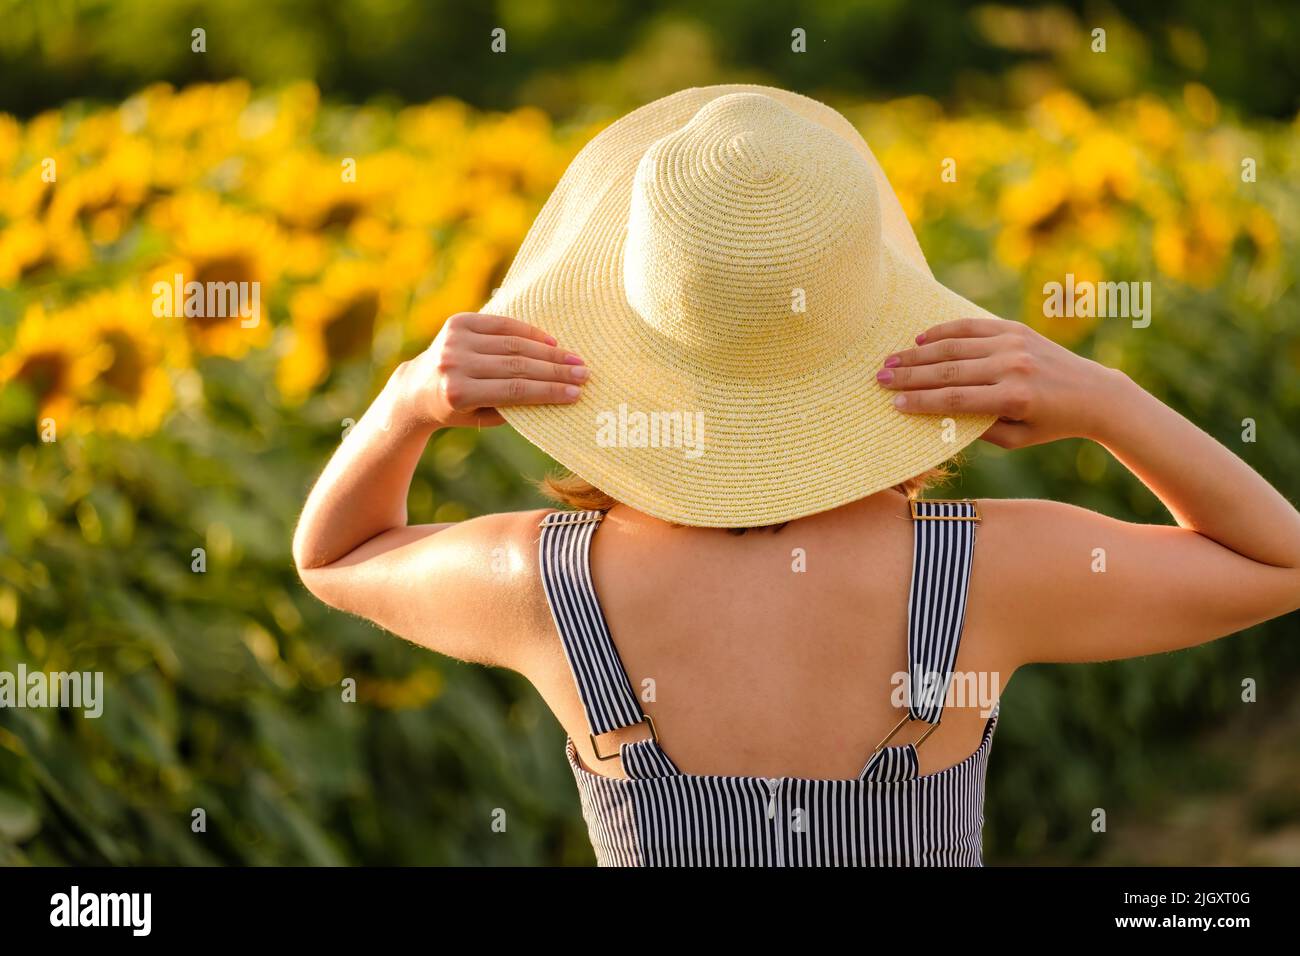 Lady holds straw hat with hands looking at sunflowers in agricultural field. Young woman poses for photo in countryside backside close view Stock Photo